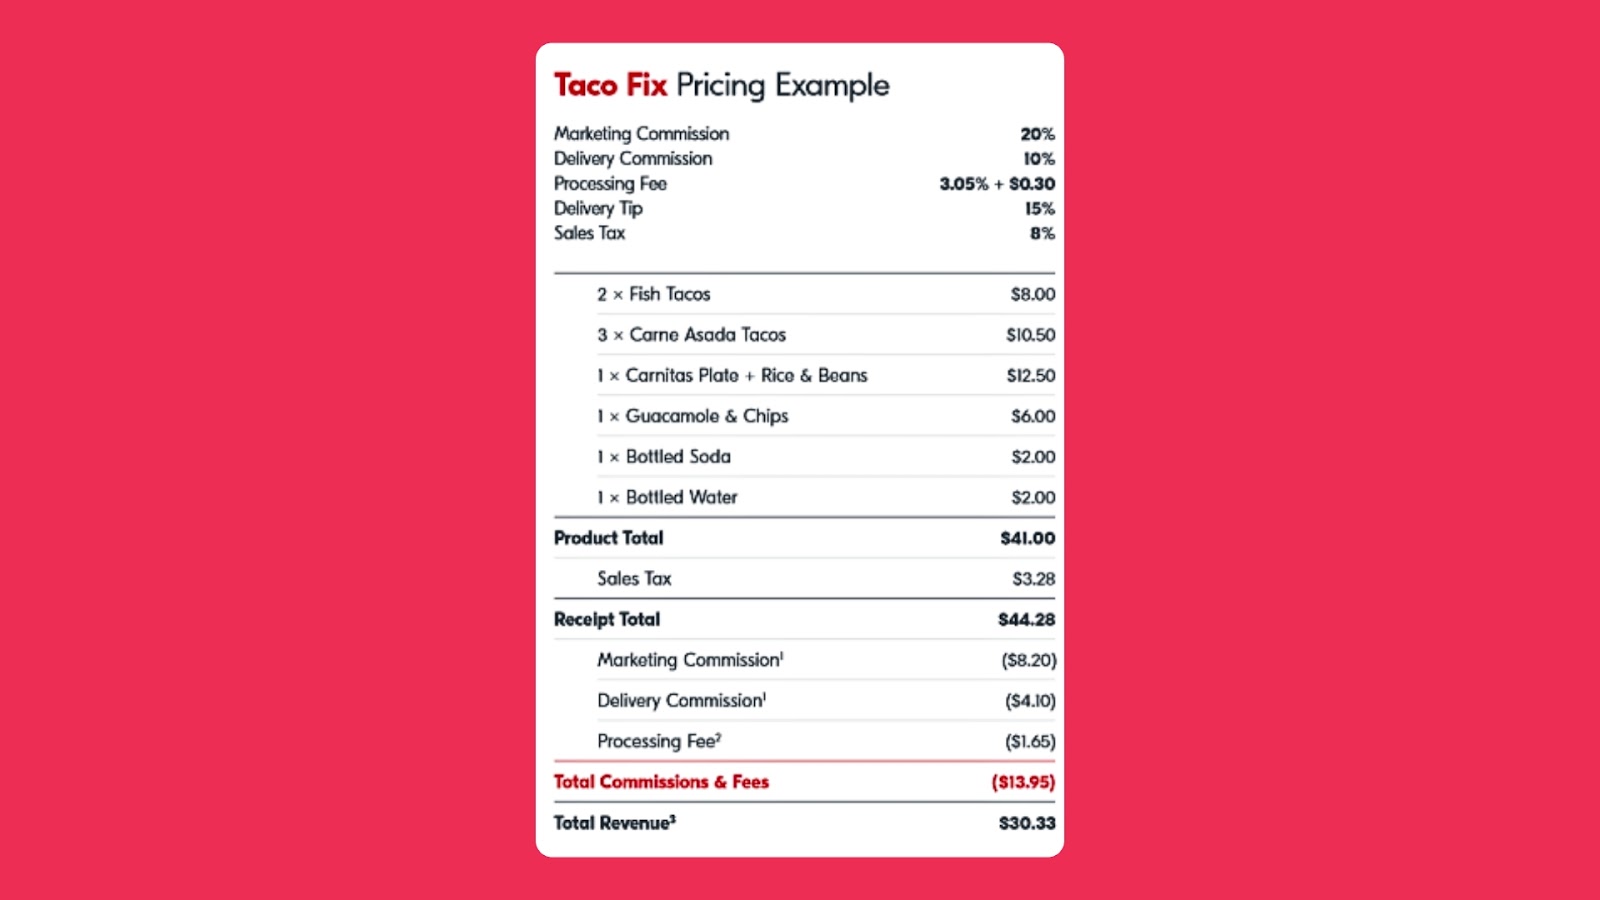 Example of 'Taco Fix Pricing': Marketing Commission 20%, Delivery Commission 10%, Processing Fee 3.05%+$0.30, Delivery Tip 15%, Sales Tax 8%. Total deductions $13.95, revenue $30.33.